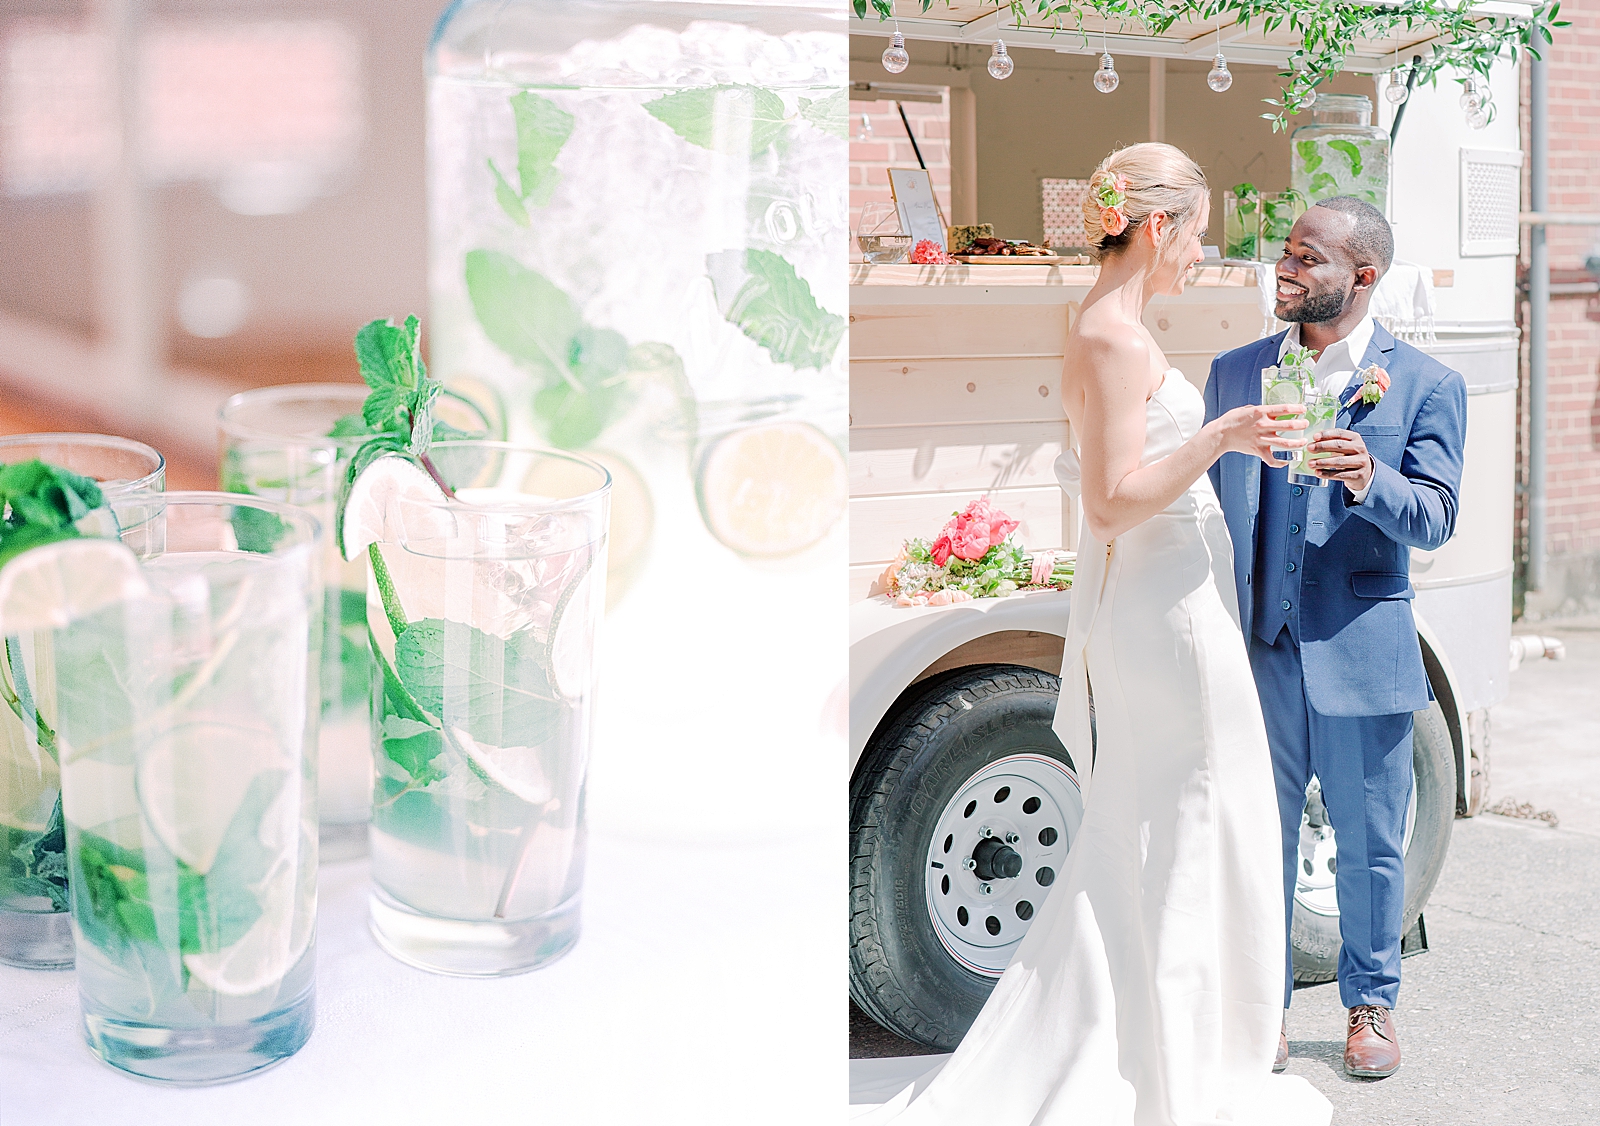 Staying Cool During Summer Weddings Refreshing Drinks and Couple Toasting Photos